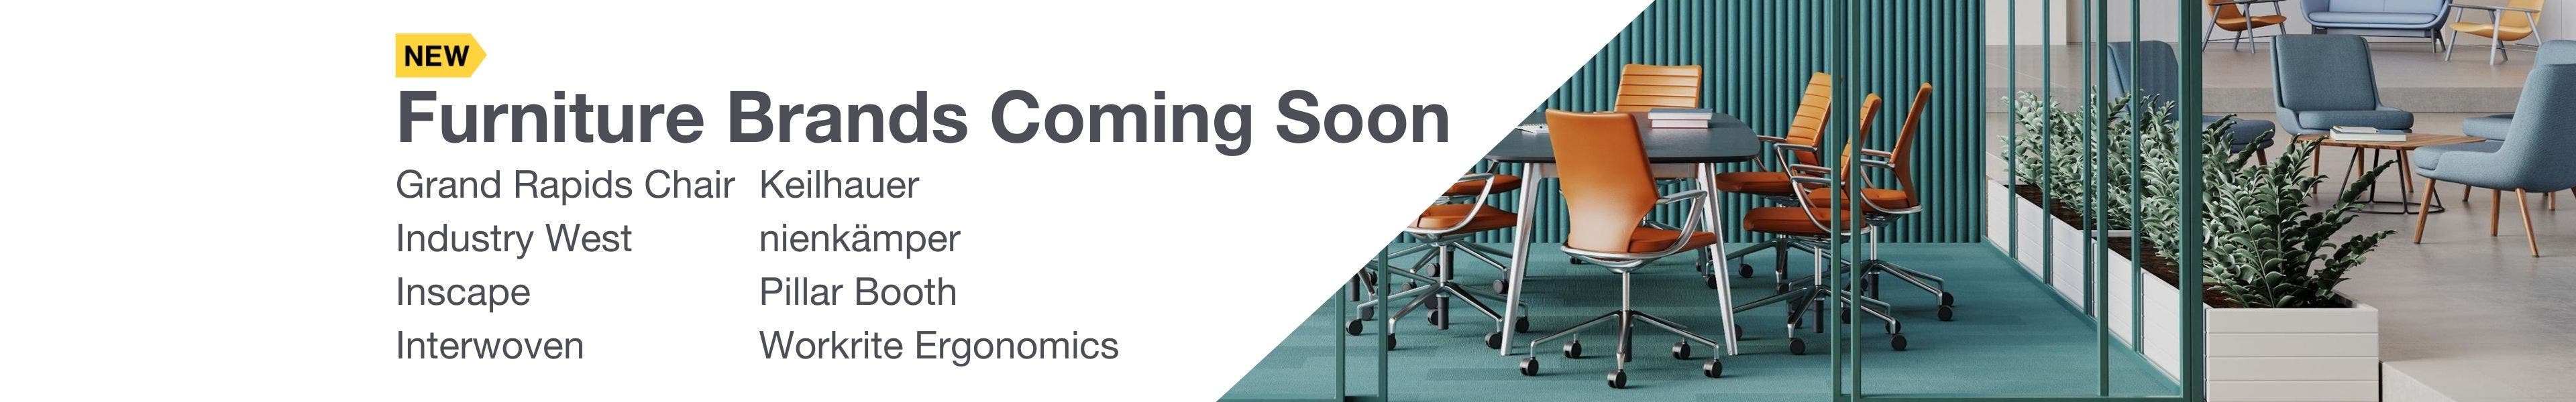 New & Coming Soon Furniture Brands